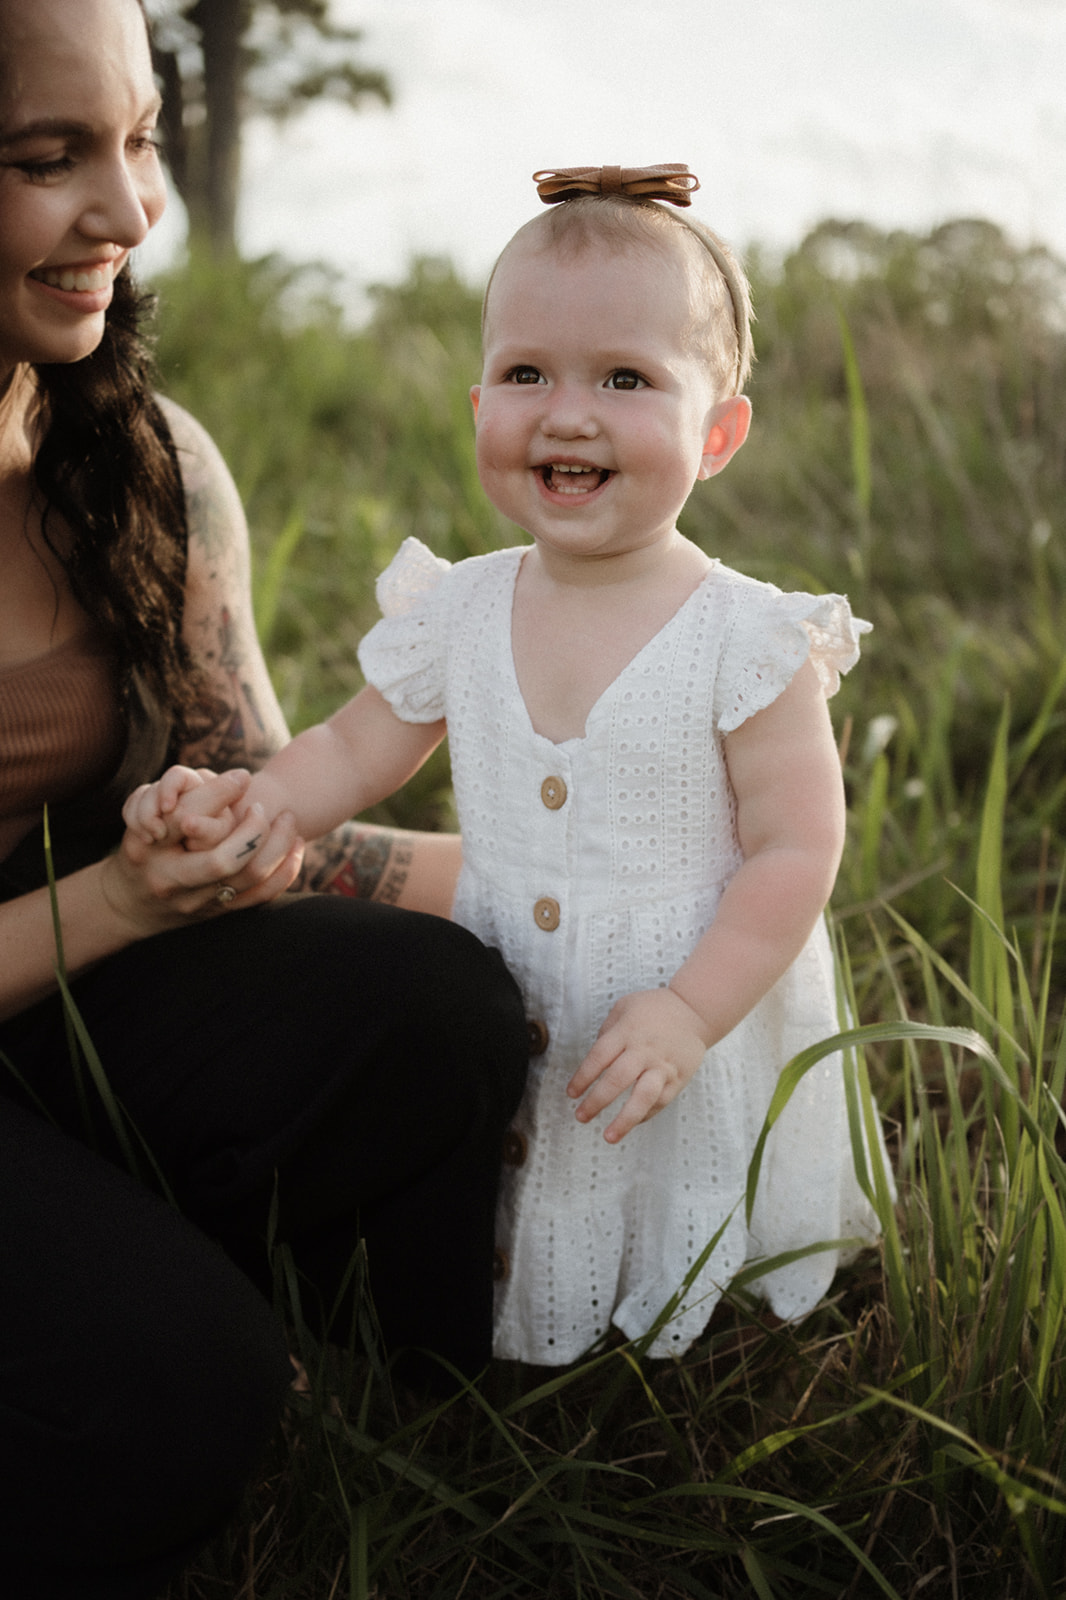 A toddler girl in a white dress plays in a grassy field with her mother